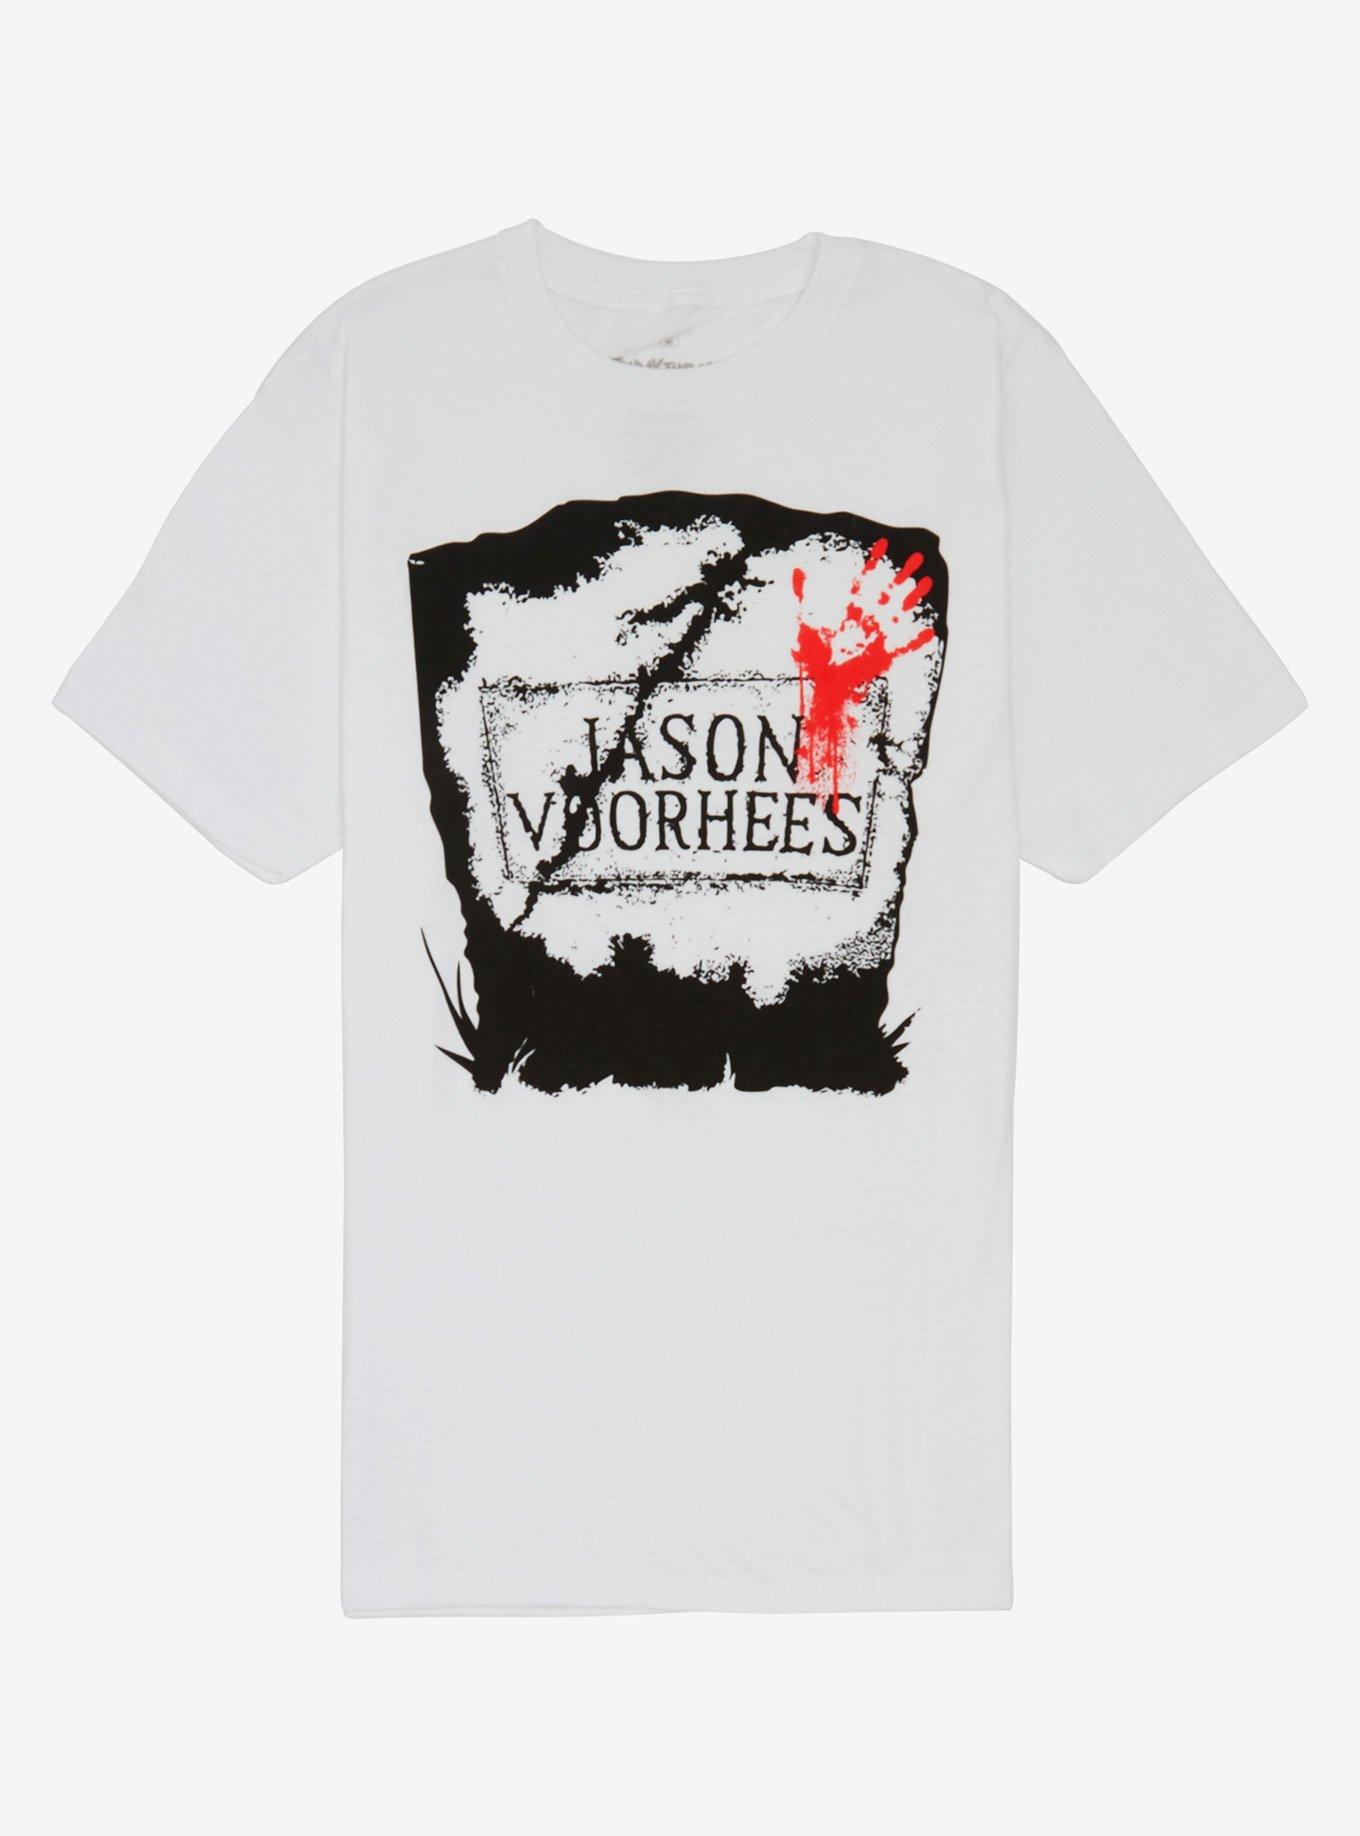 Friday The 13th Jason Voorhees Gravestone T-Shirt | Hot Topic